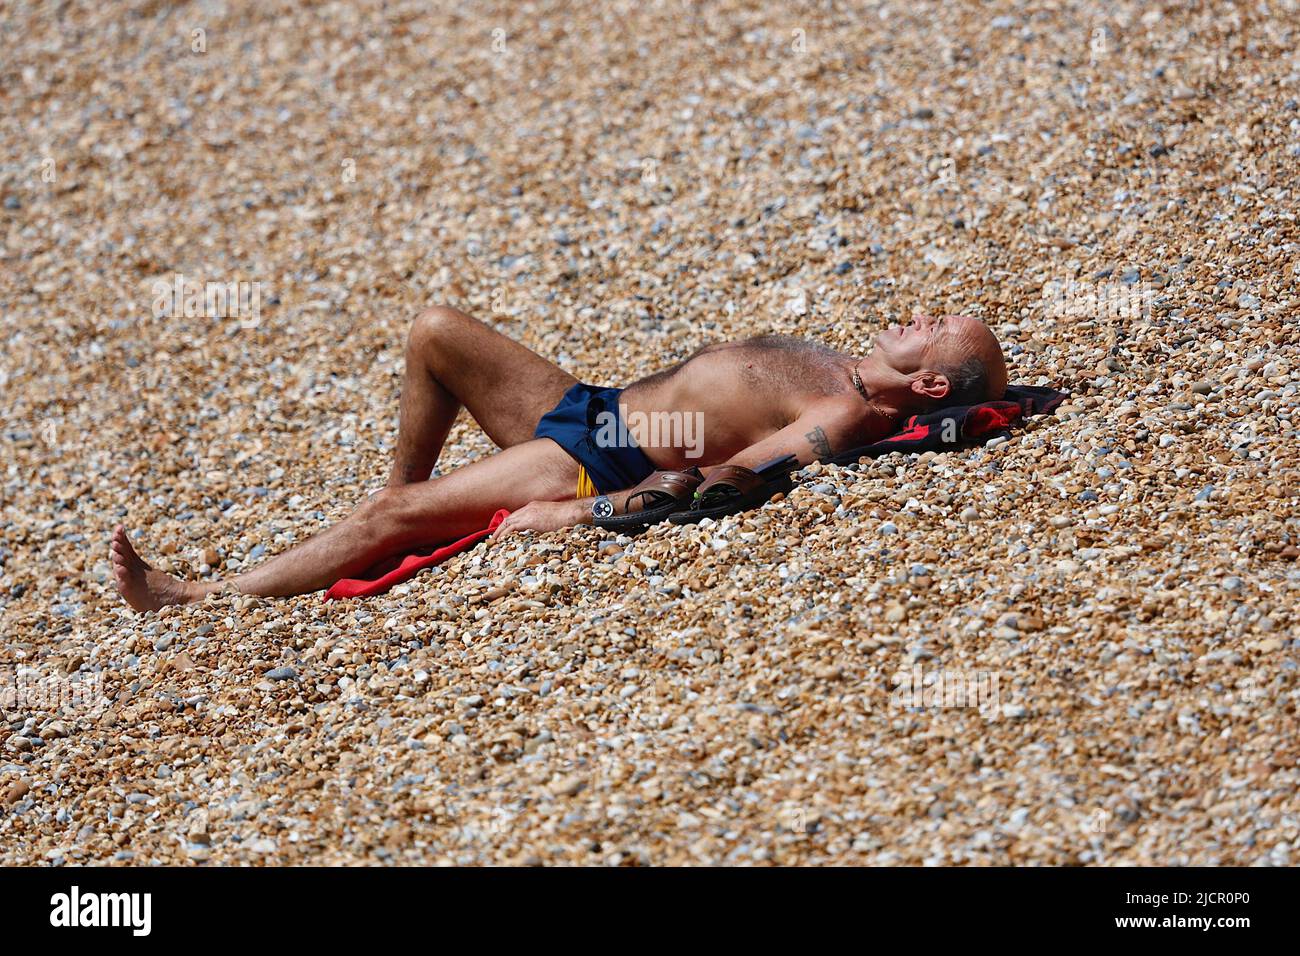 Hastings, East Sussex, UK. 15 Jun, 2022. UK Weather: Hot and sunny at the seaside town of Hastings in East Sussex as Brits enjoy the warm weather today along the seafront promenade. A man soaks up the rays on the pebble beach. Photo Credit: Paul Lawrenson /Alamy Live News Stock Photo